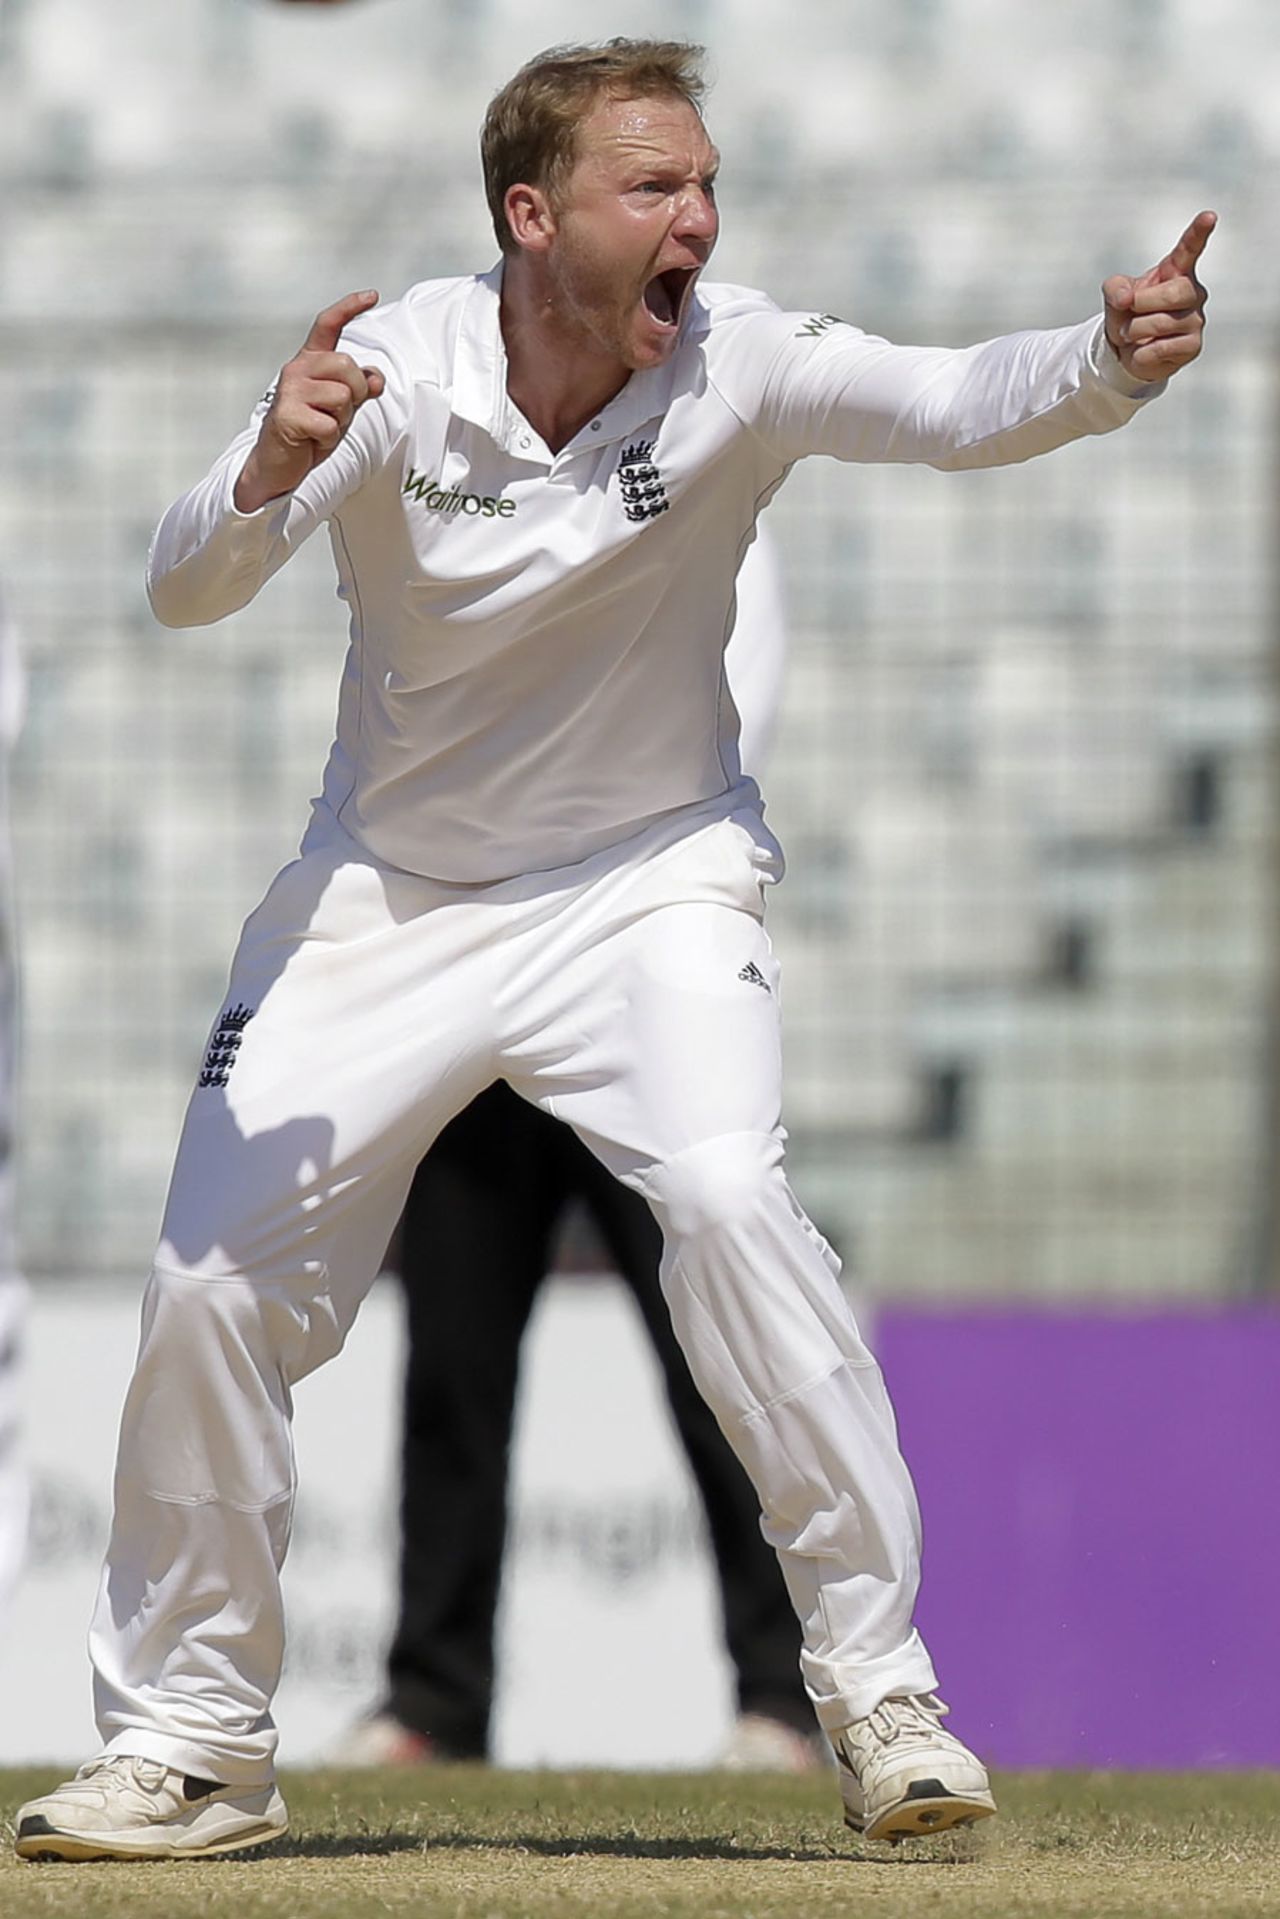 Gareth Batty claimed two lbws in quick succession - one after a successful review, Bangladesh v England, 1st Test, Chittagong, 4th day, October 23, 2016